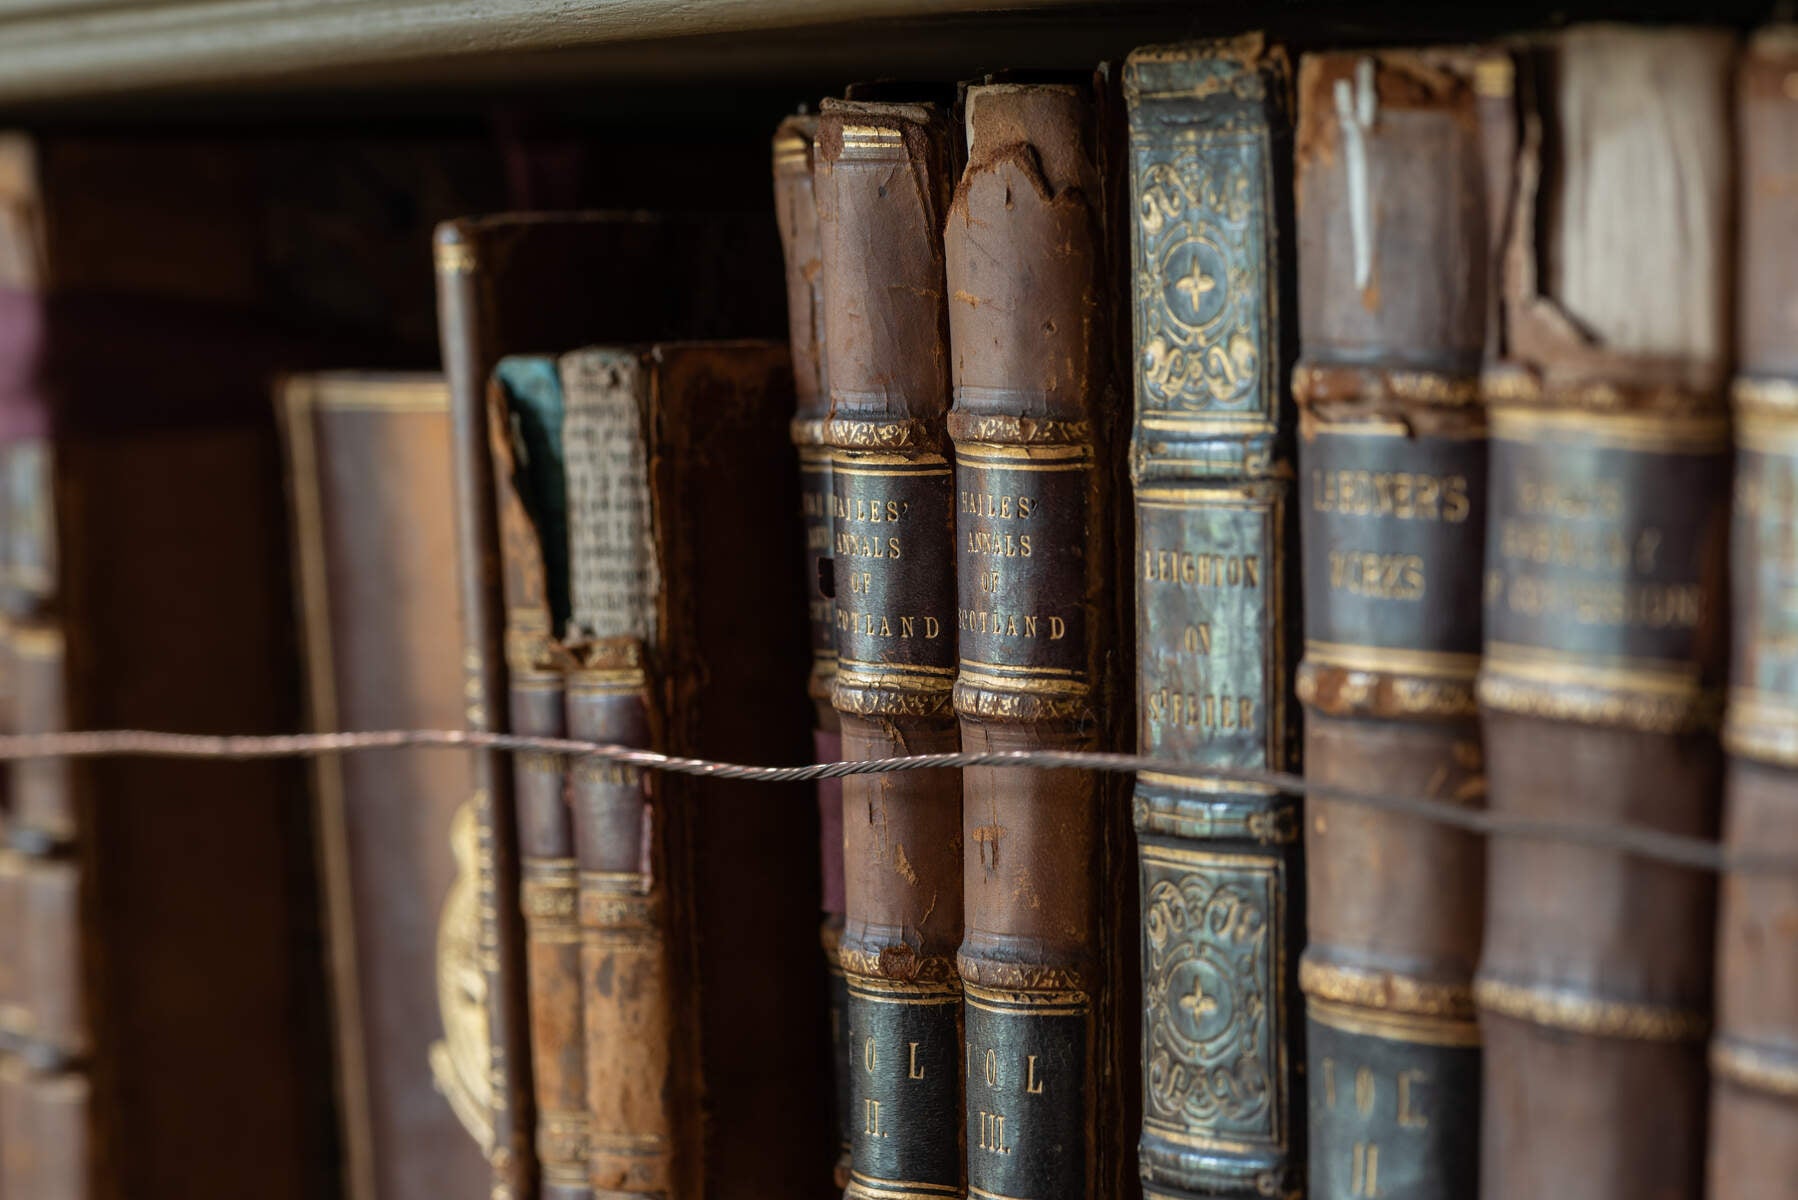 A close up shot of the old books lining the walls in Newbridge House and Farm in Donabate.